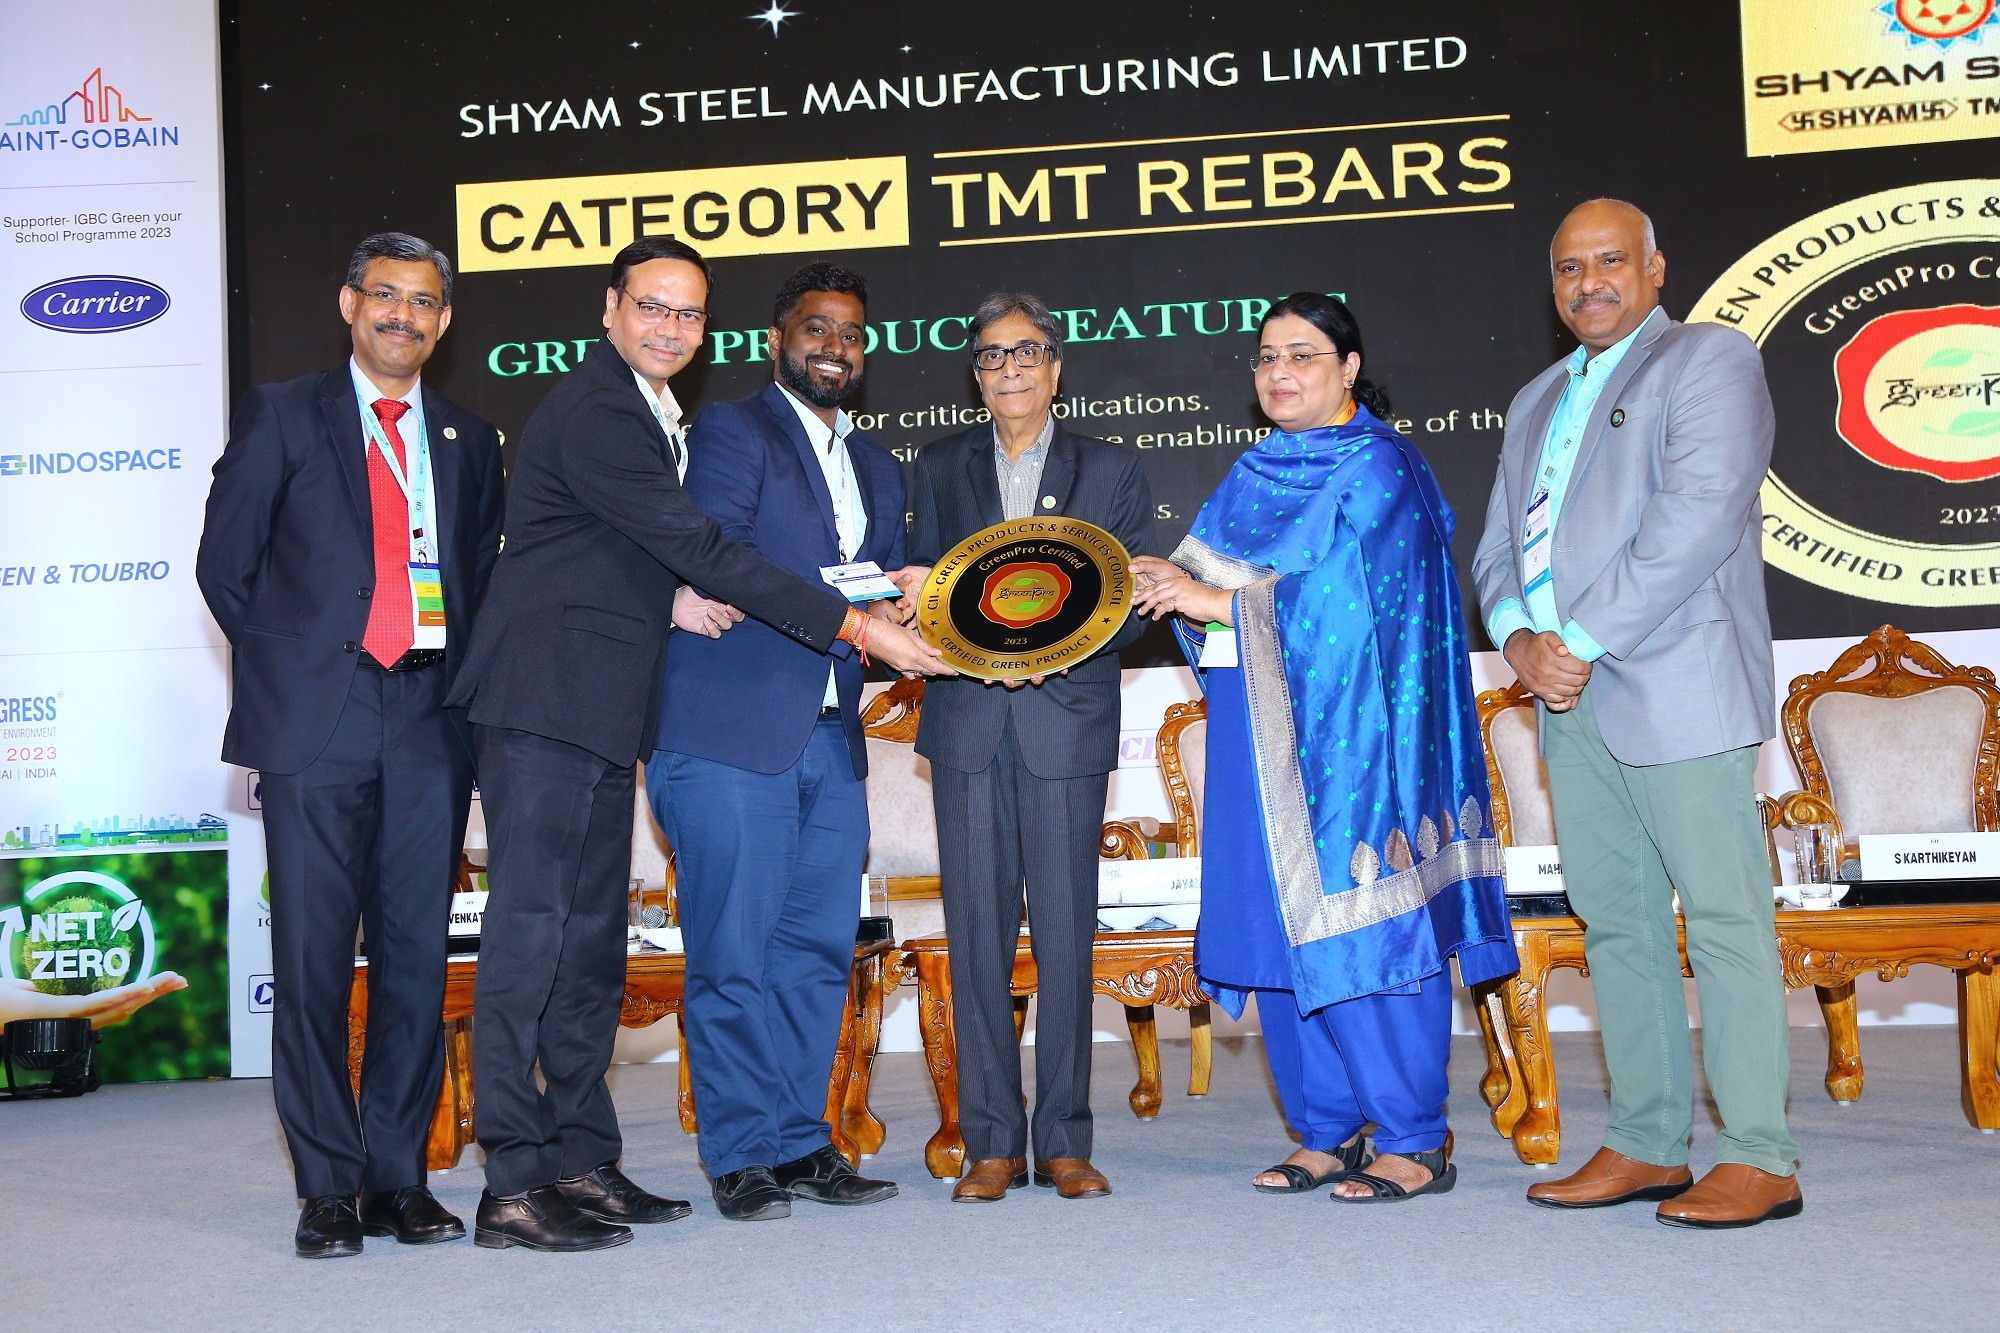 Shyam Steel acquired renowned GreenPro certification.